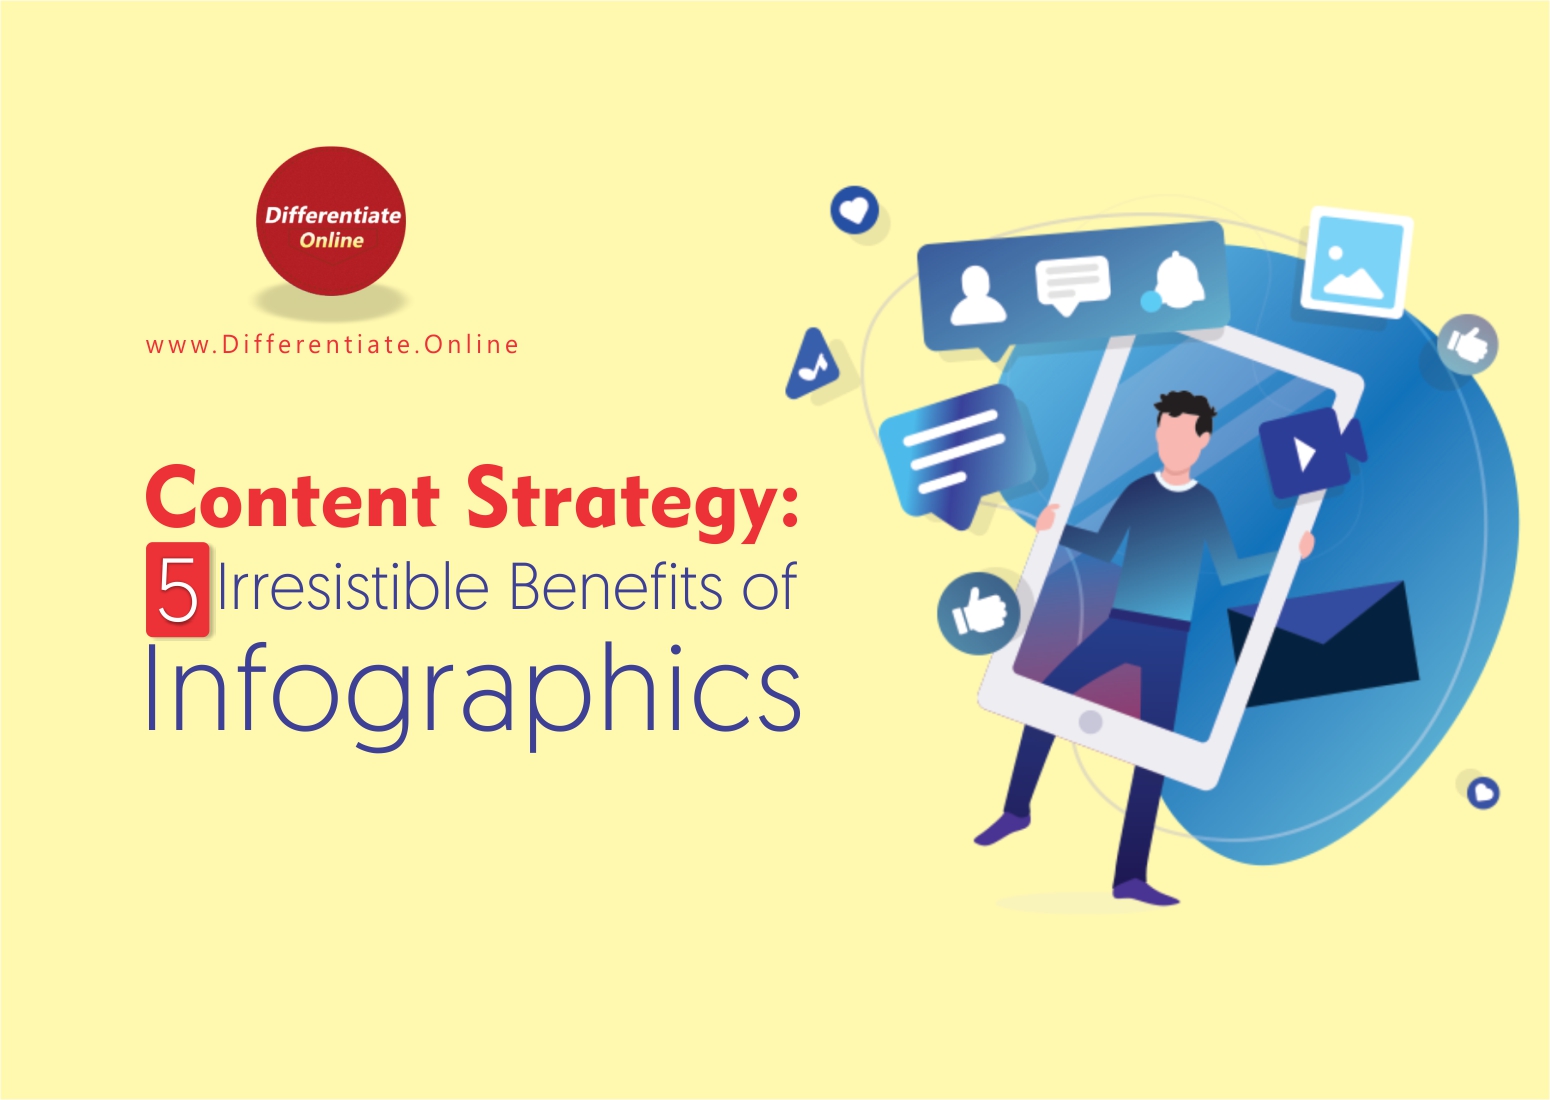 Content Strategy: 5 Irresistible Benefits of Infographics